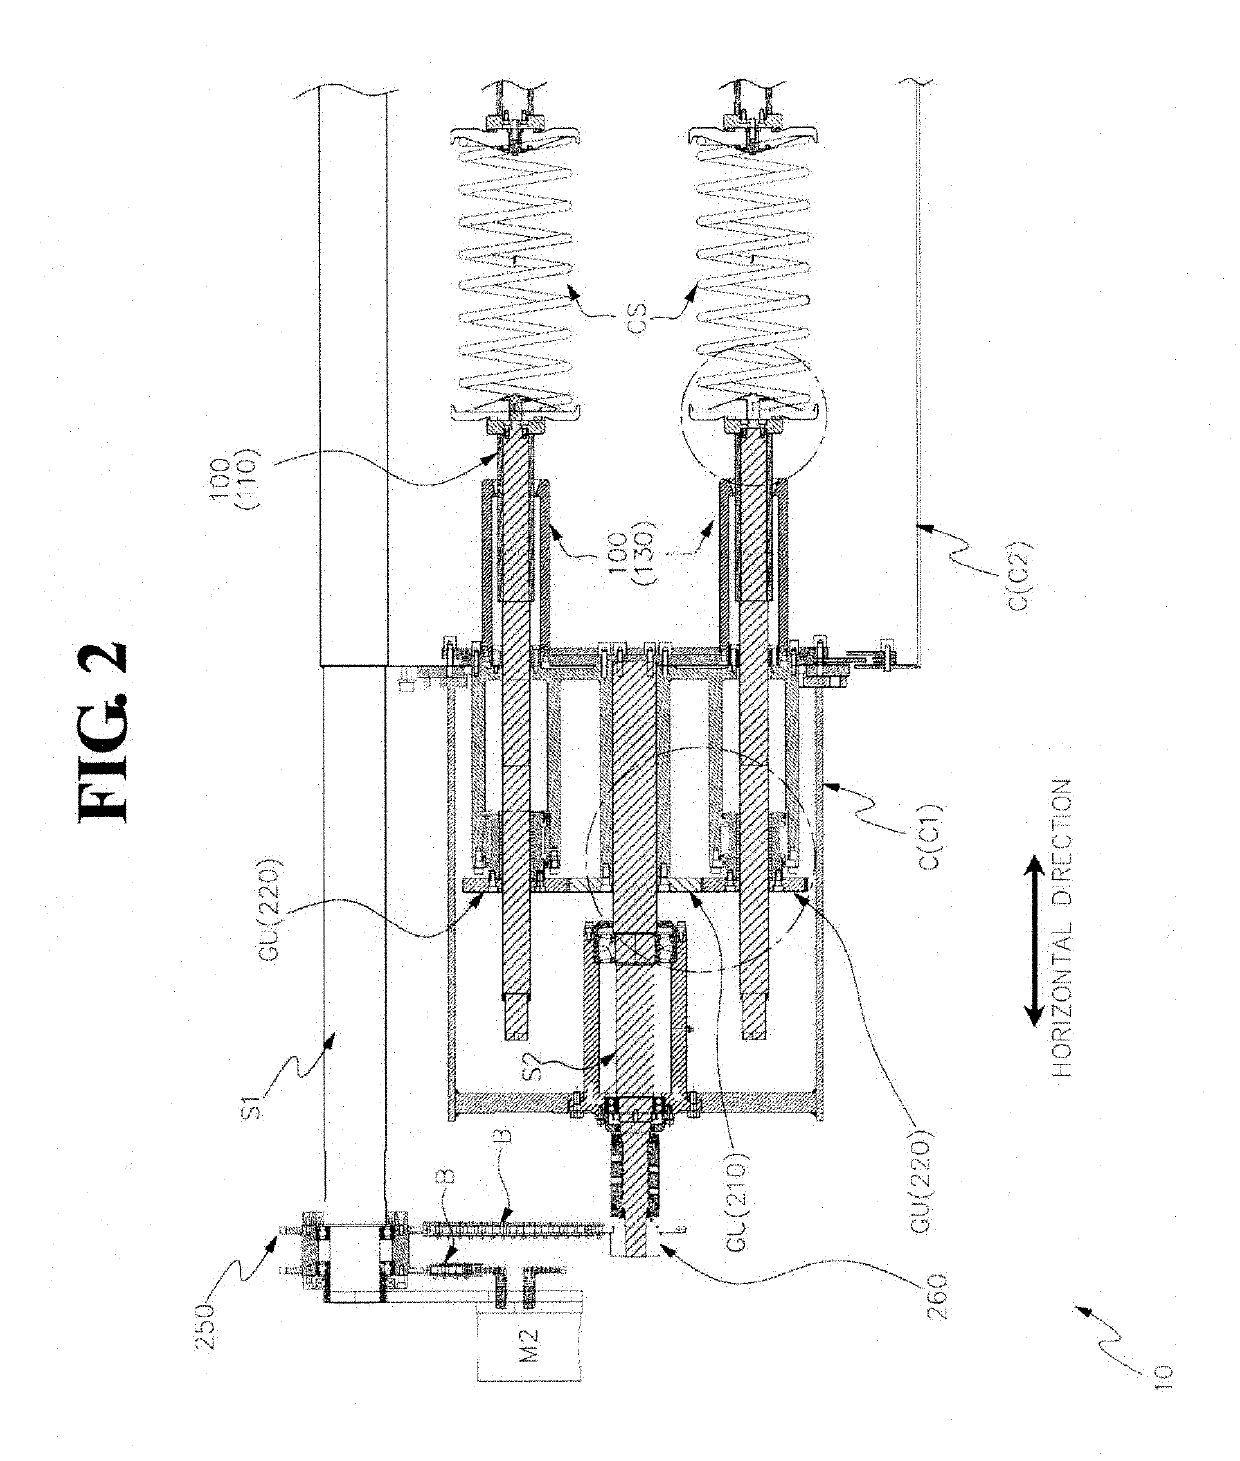 Continuous shot peening apparatus and method for coil spring